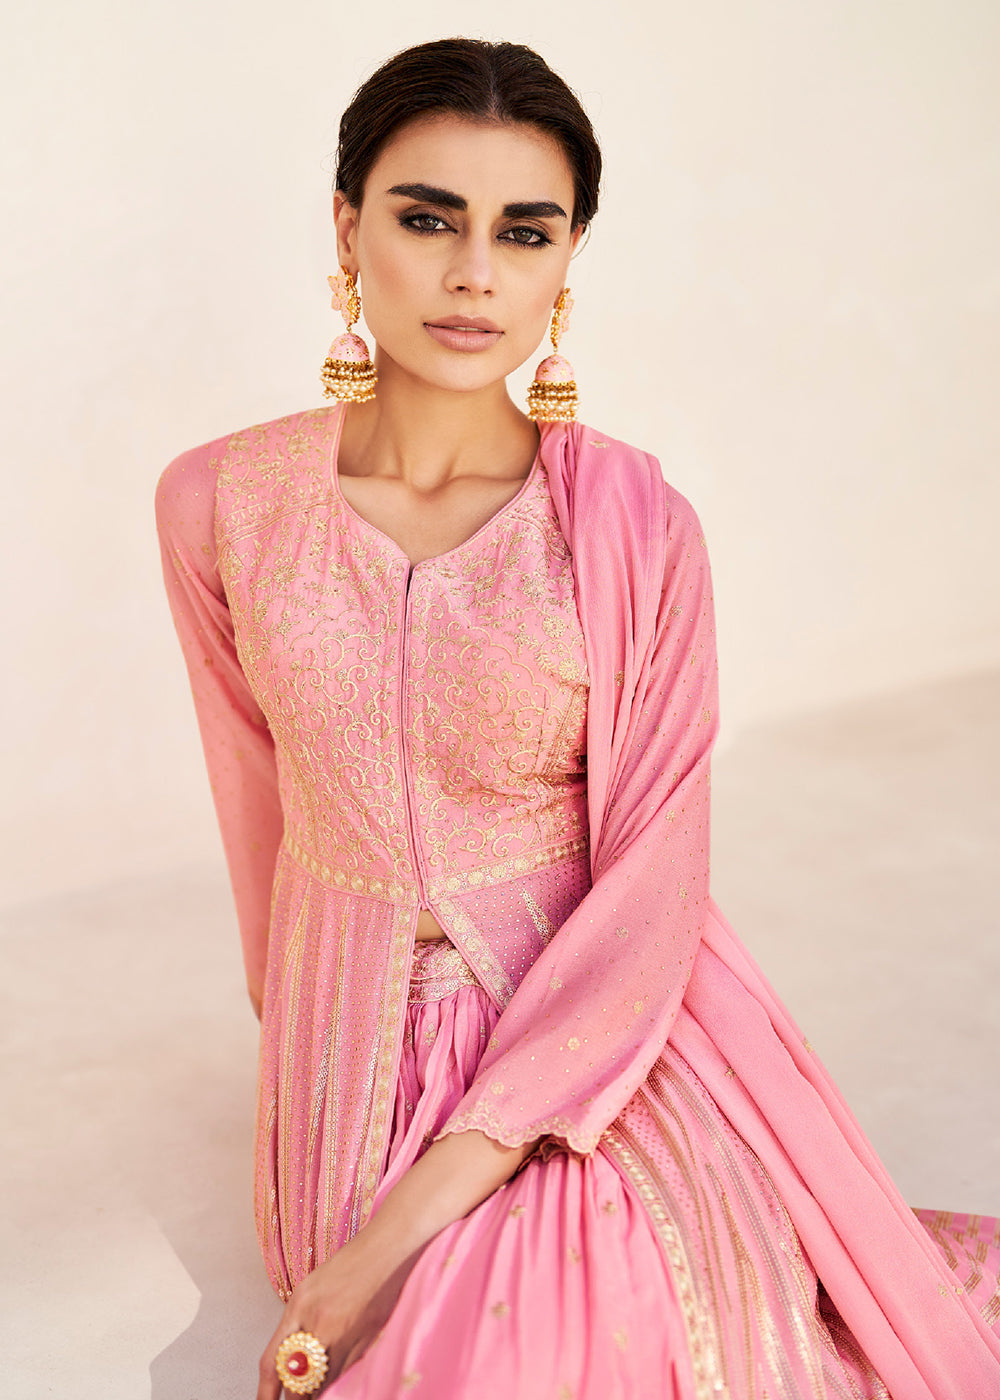 Buy Now Pretty Pink Embroidered Wedding Party Lehenga Skirt Suit Set Online in USA, UK, Canada & Worldwide at Empress Clothing.